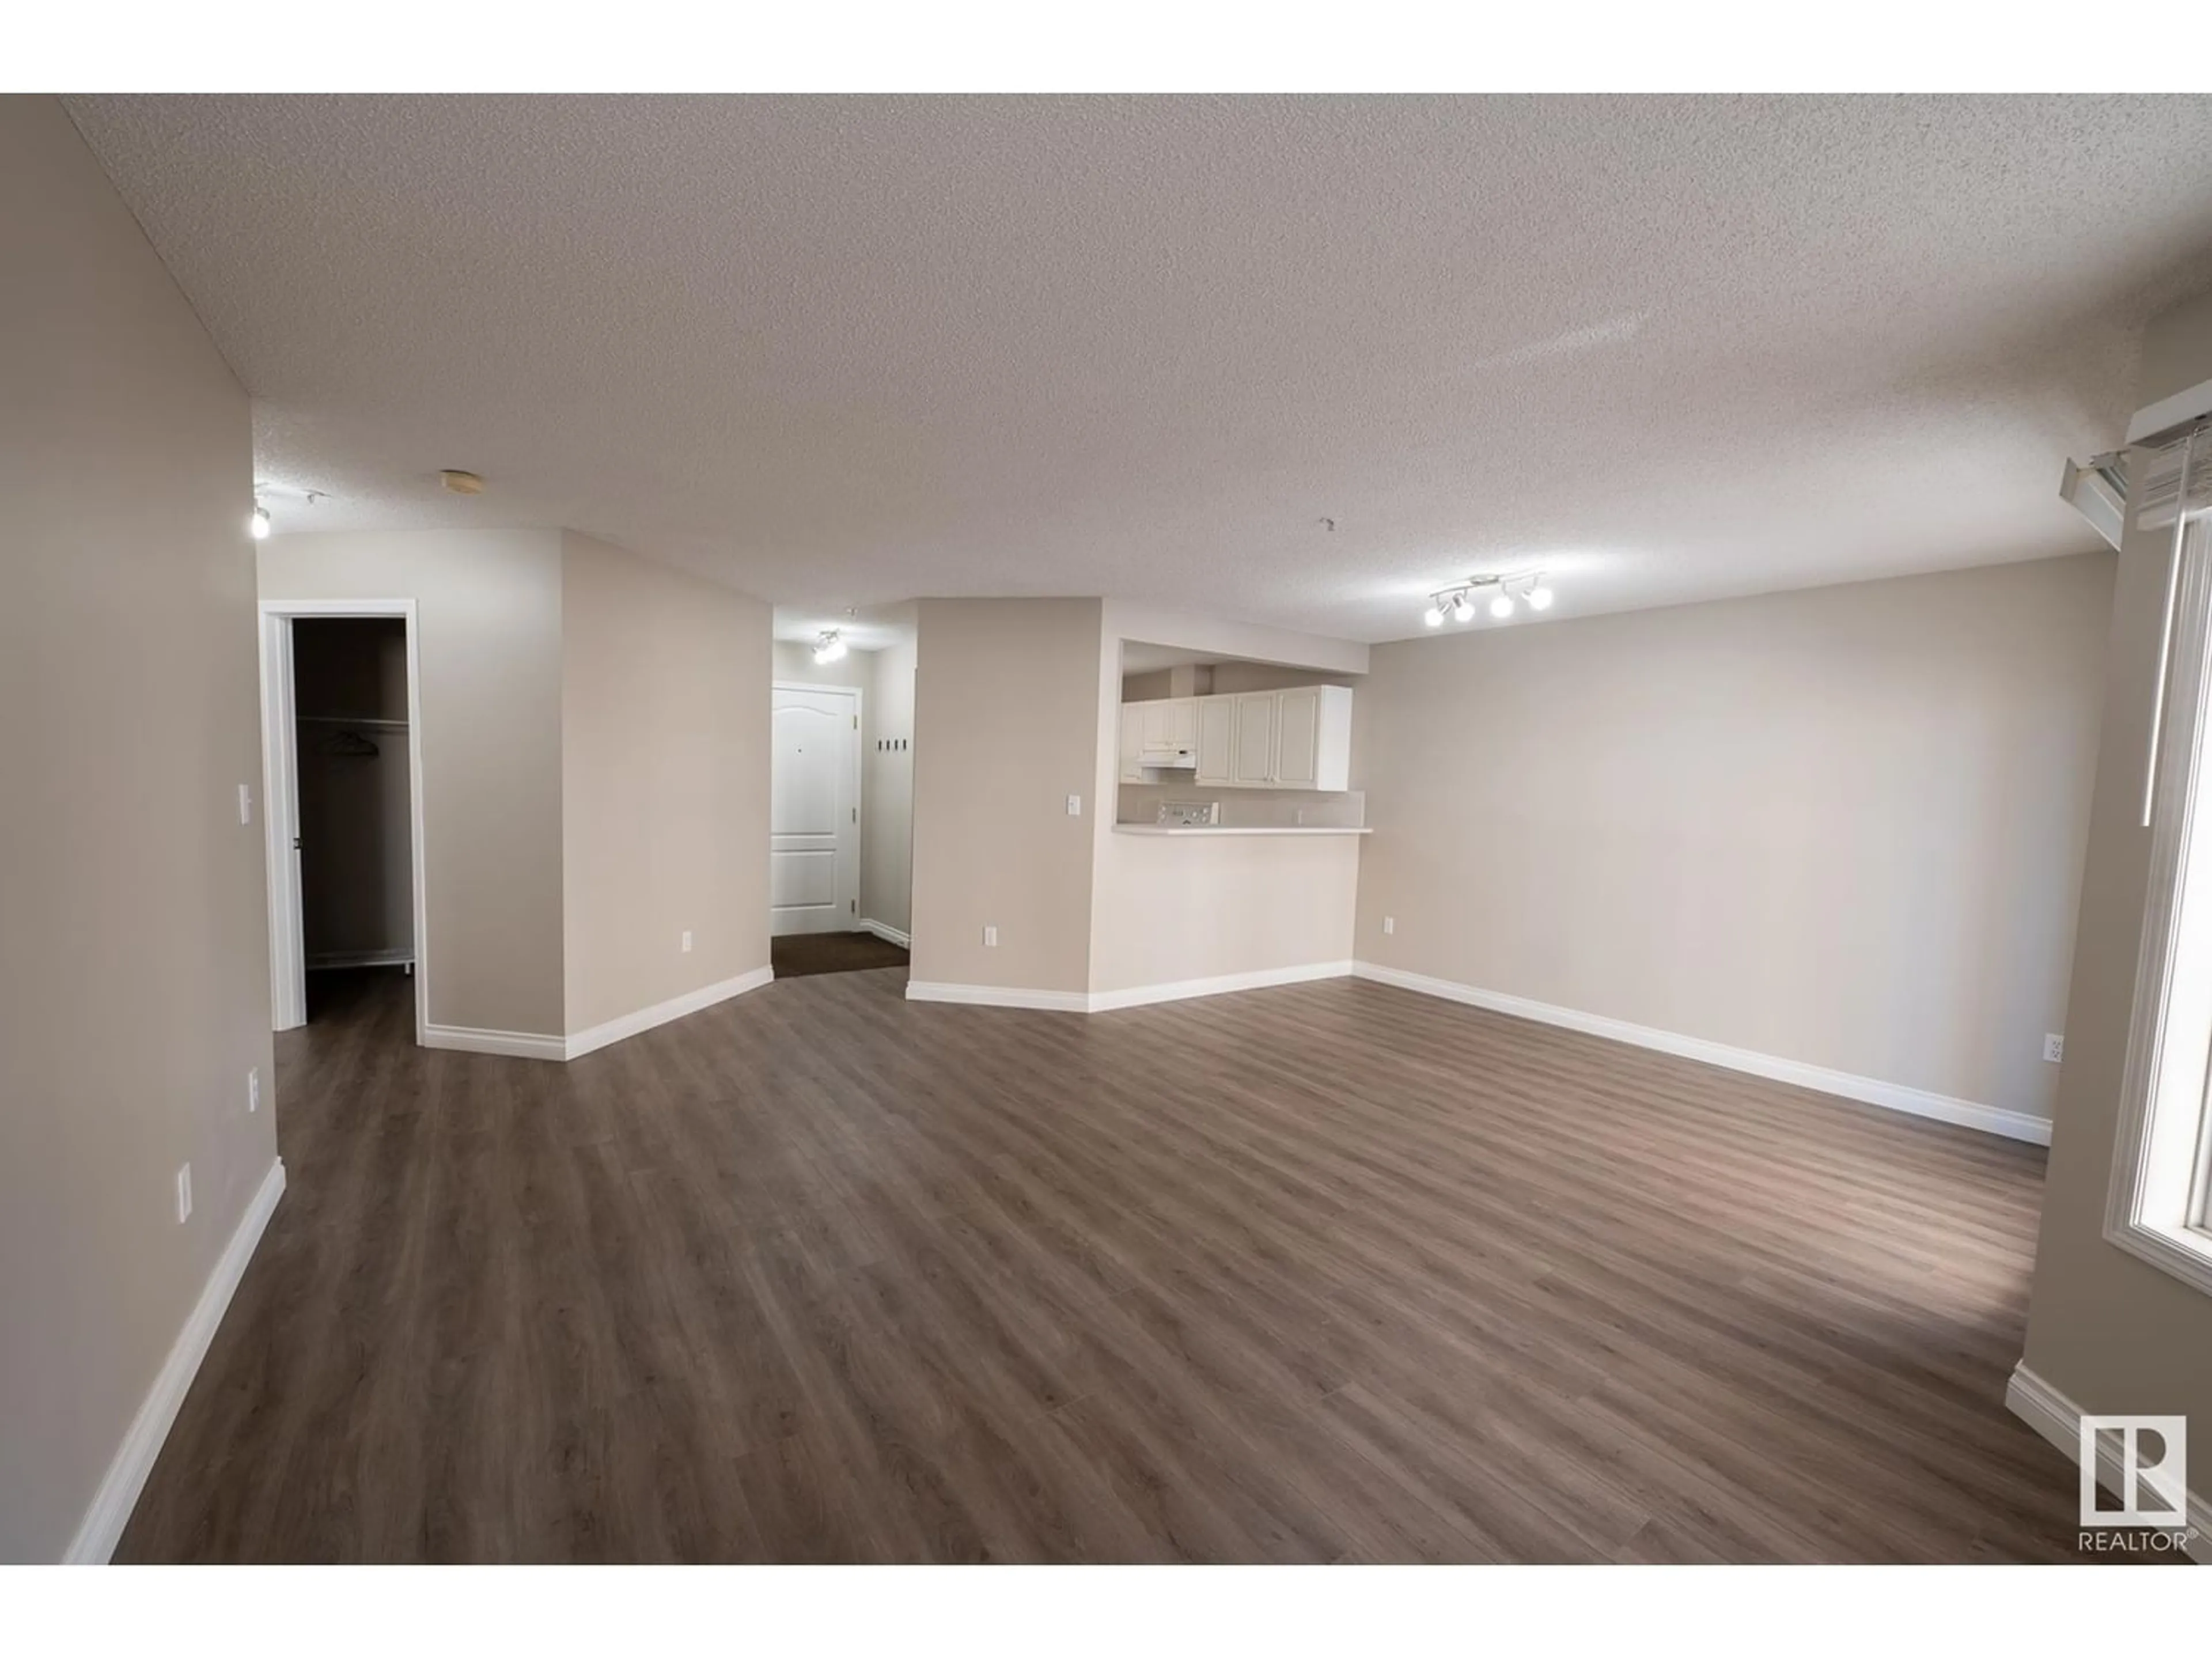 A pic of a room for #111 10153 117 ST NW, Edmonton Alberta T5K1X5